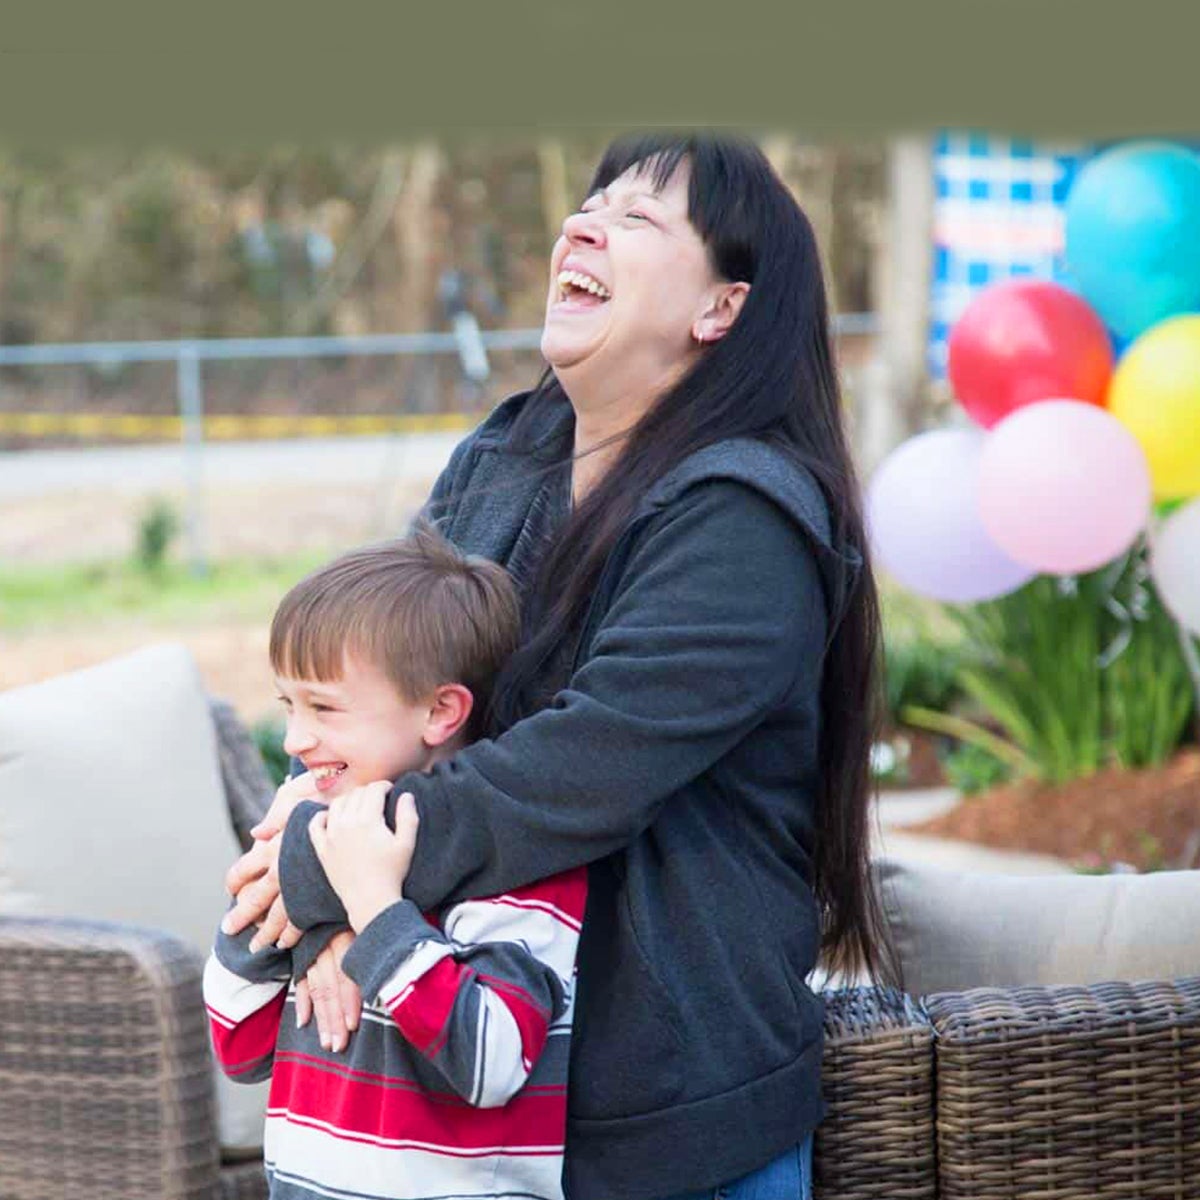 Gabe and his mom, Peggy, laugh outside their restored home.